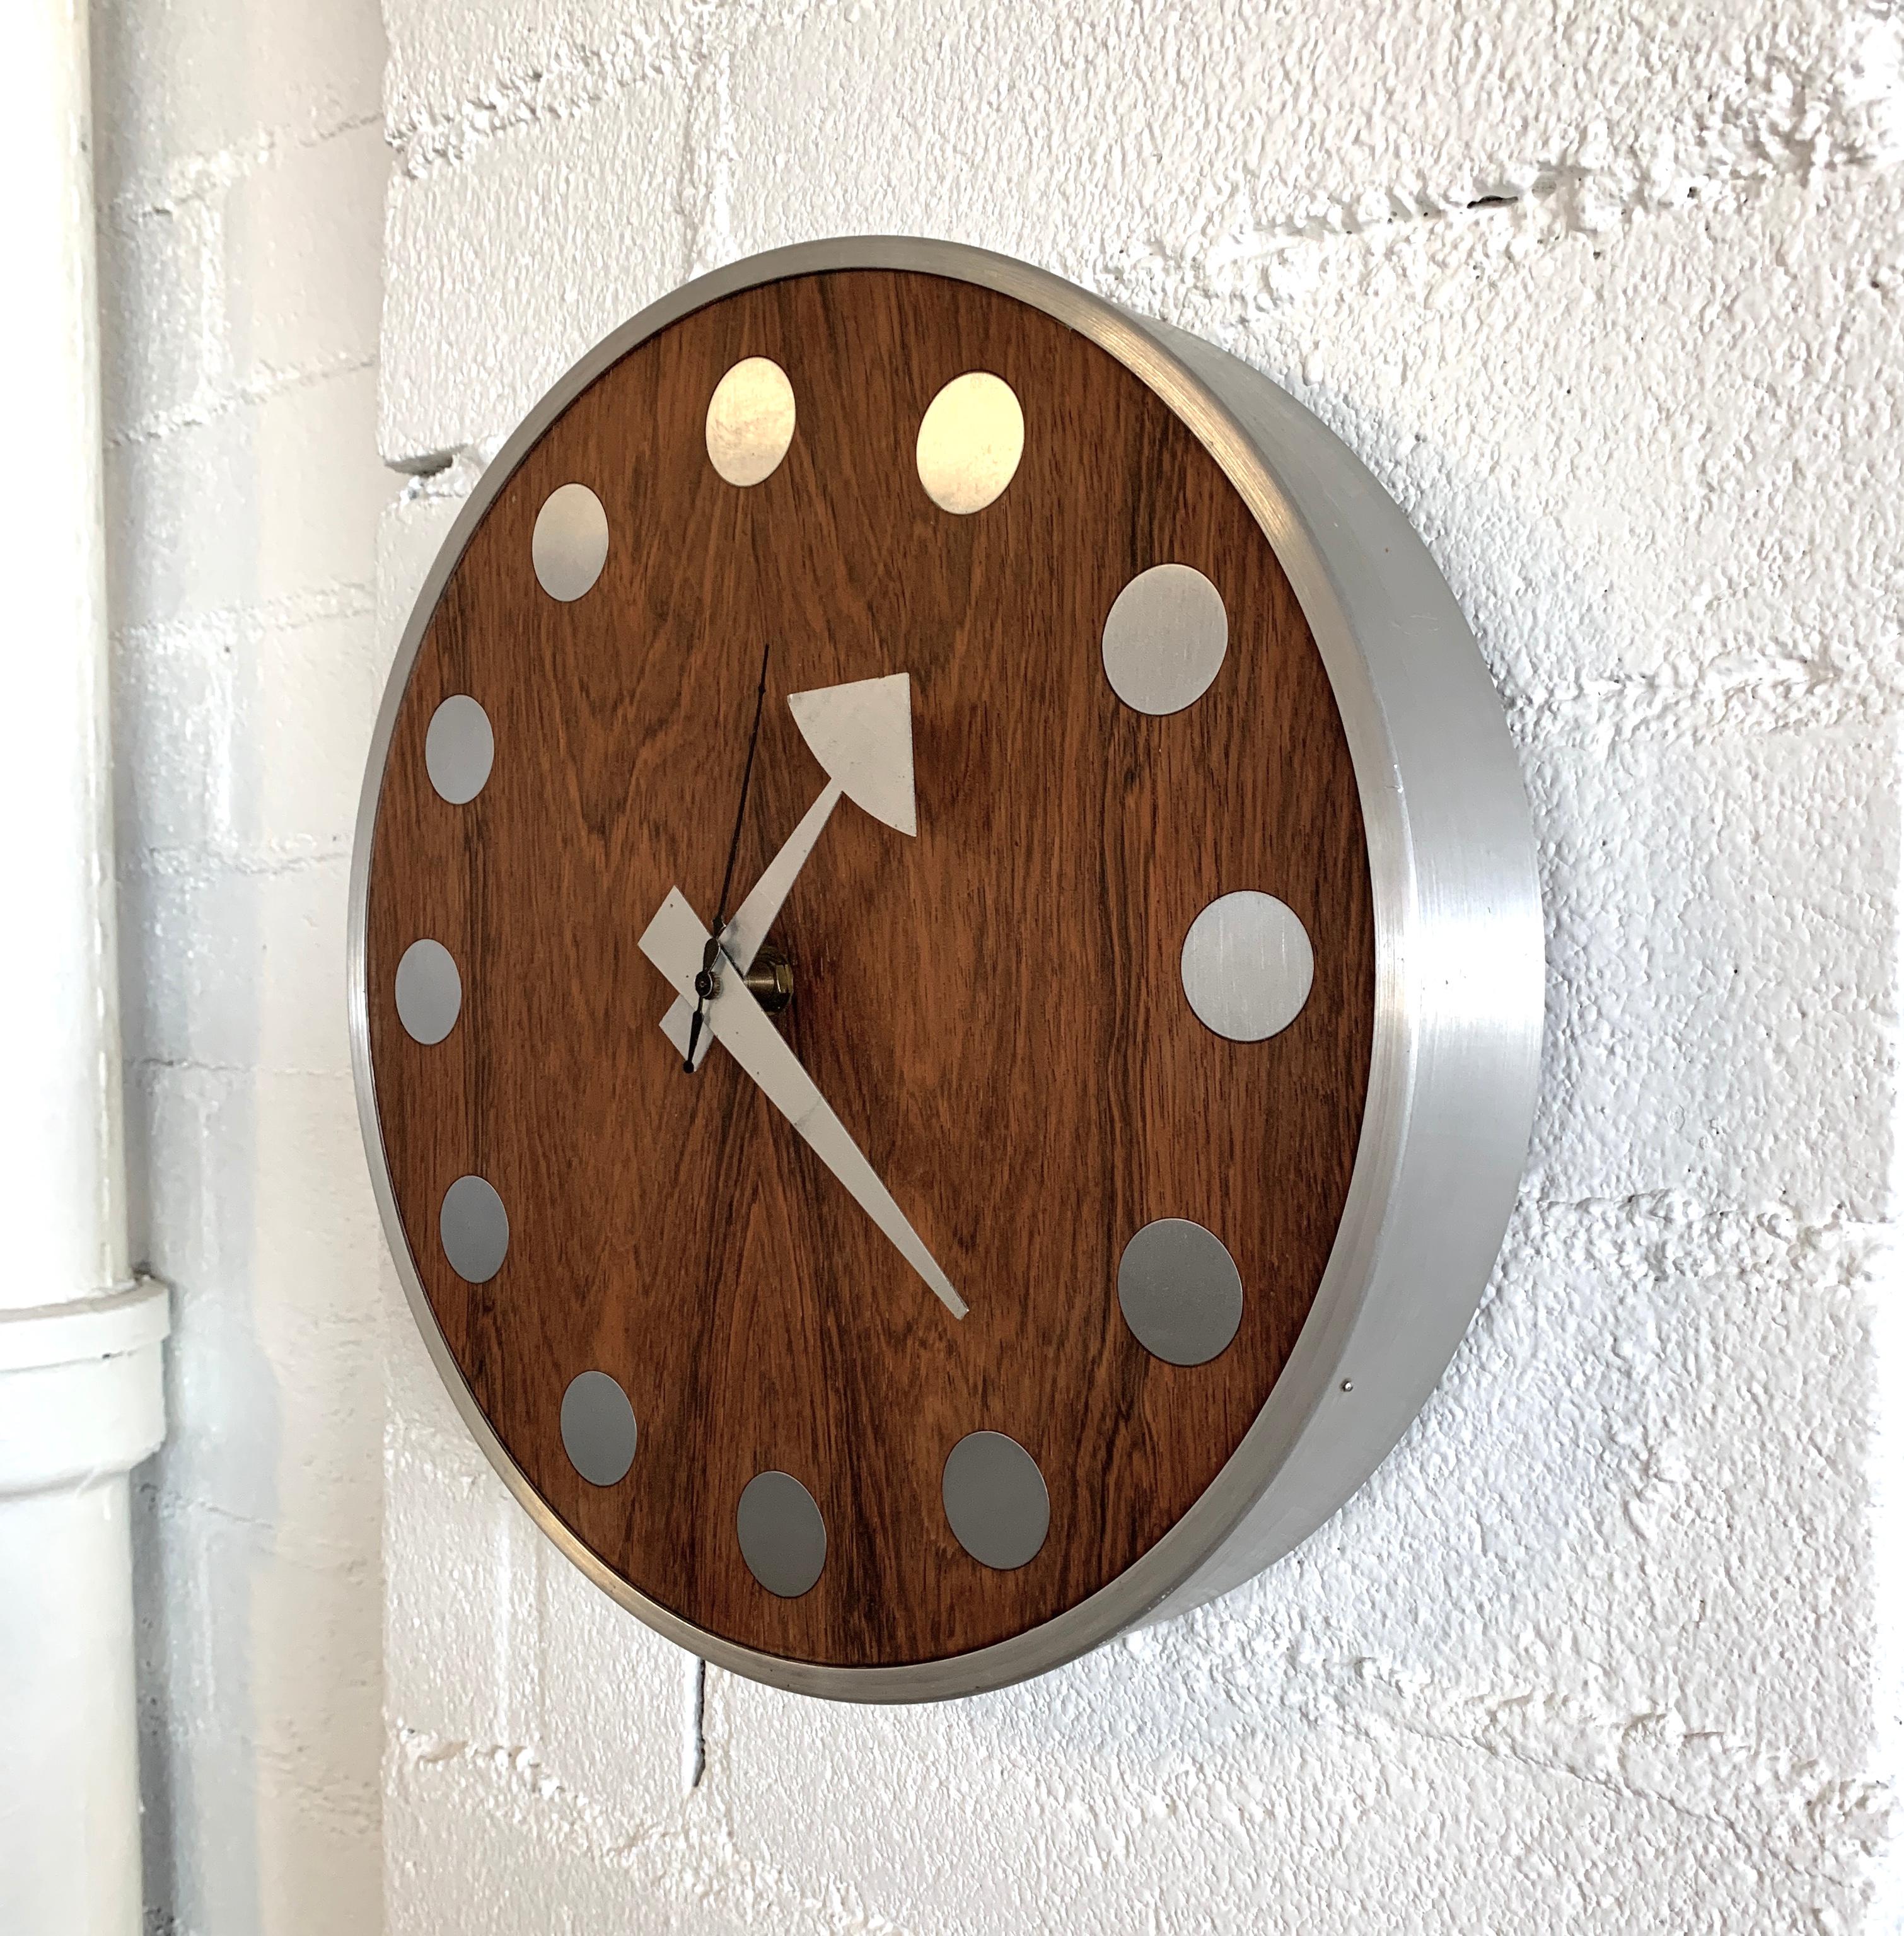 A beautiful rosewood wall clock designed by Arthur Umanoff for the Howard Miller Company in the early 1970s. This is model 7564 Meridian. It has a quartz movement. We put a new battery in and it works nicely. Aluminum shell and hands with a rosewood